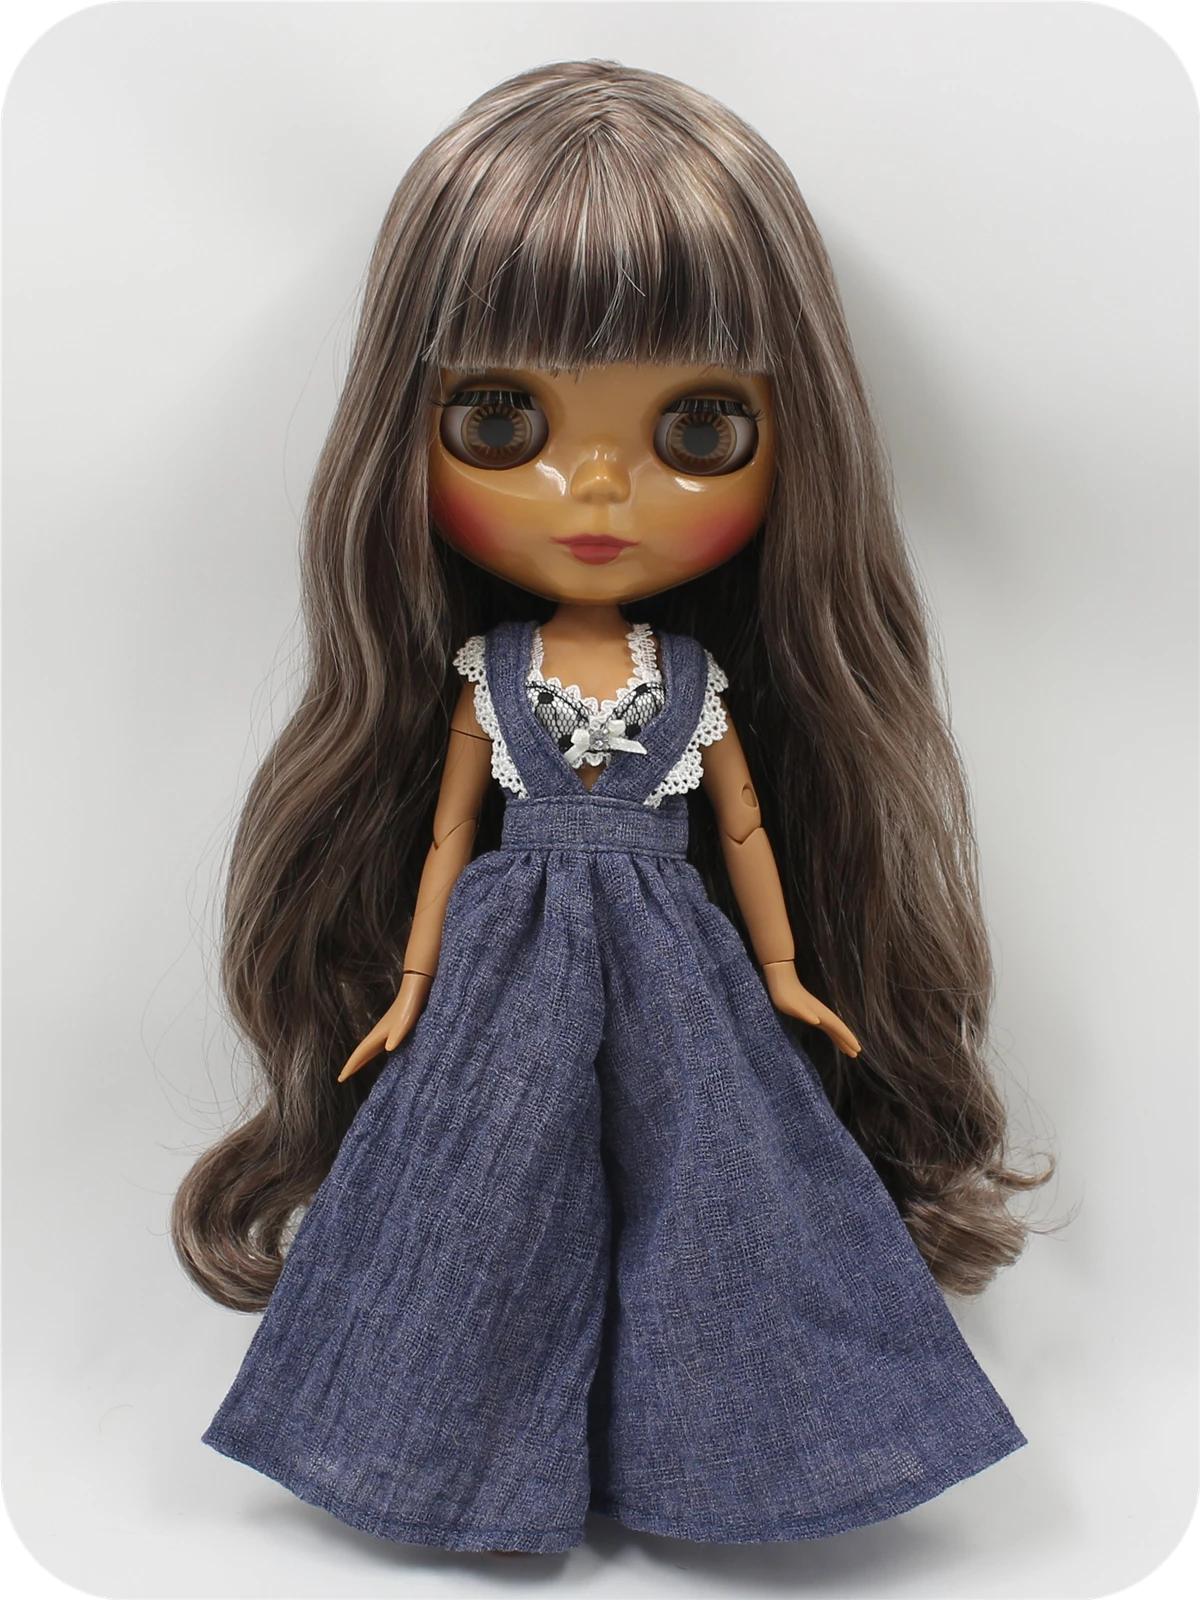 Neo Blythe Doll with Multi-Color Hair, Dark Skin, Shiny Cute Face & Factory Jointed Body 2